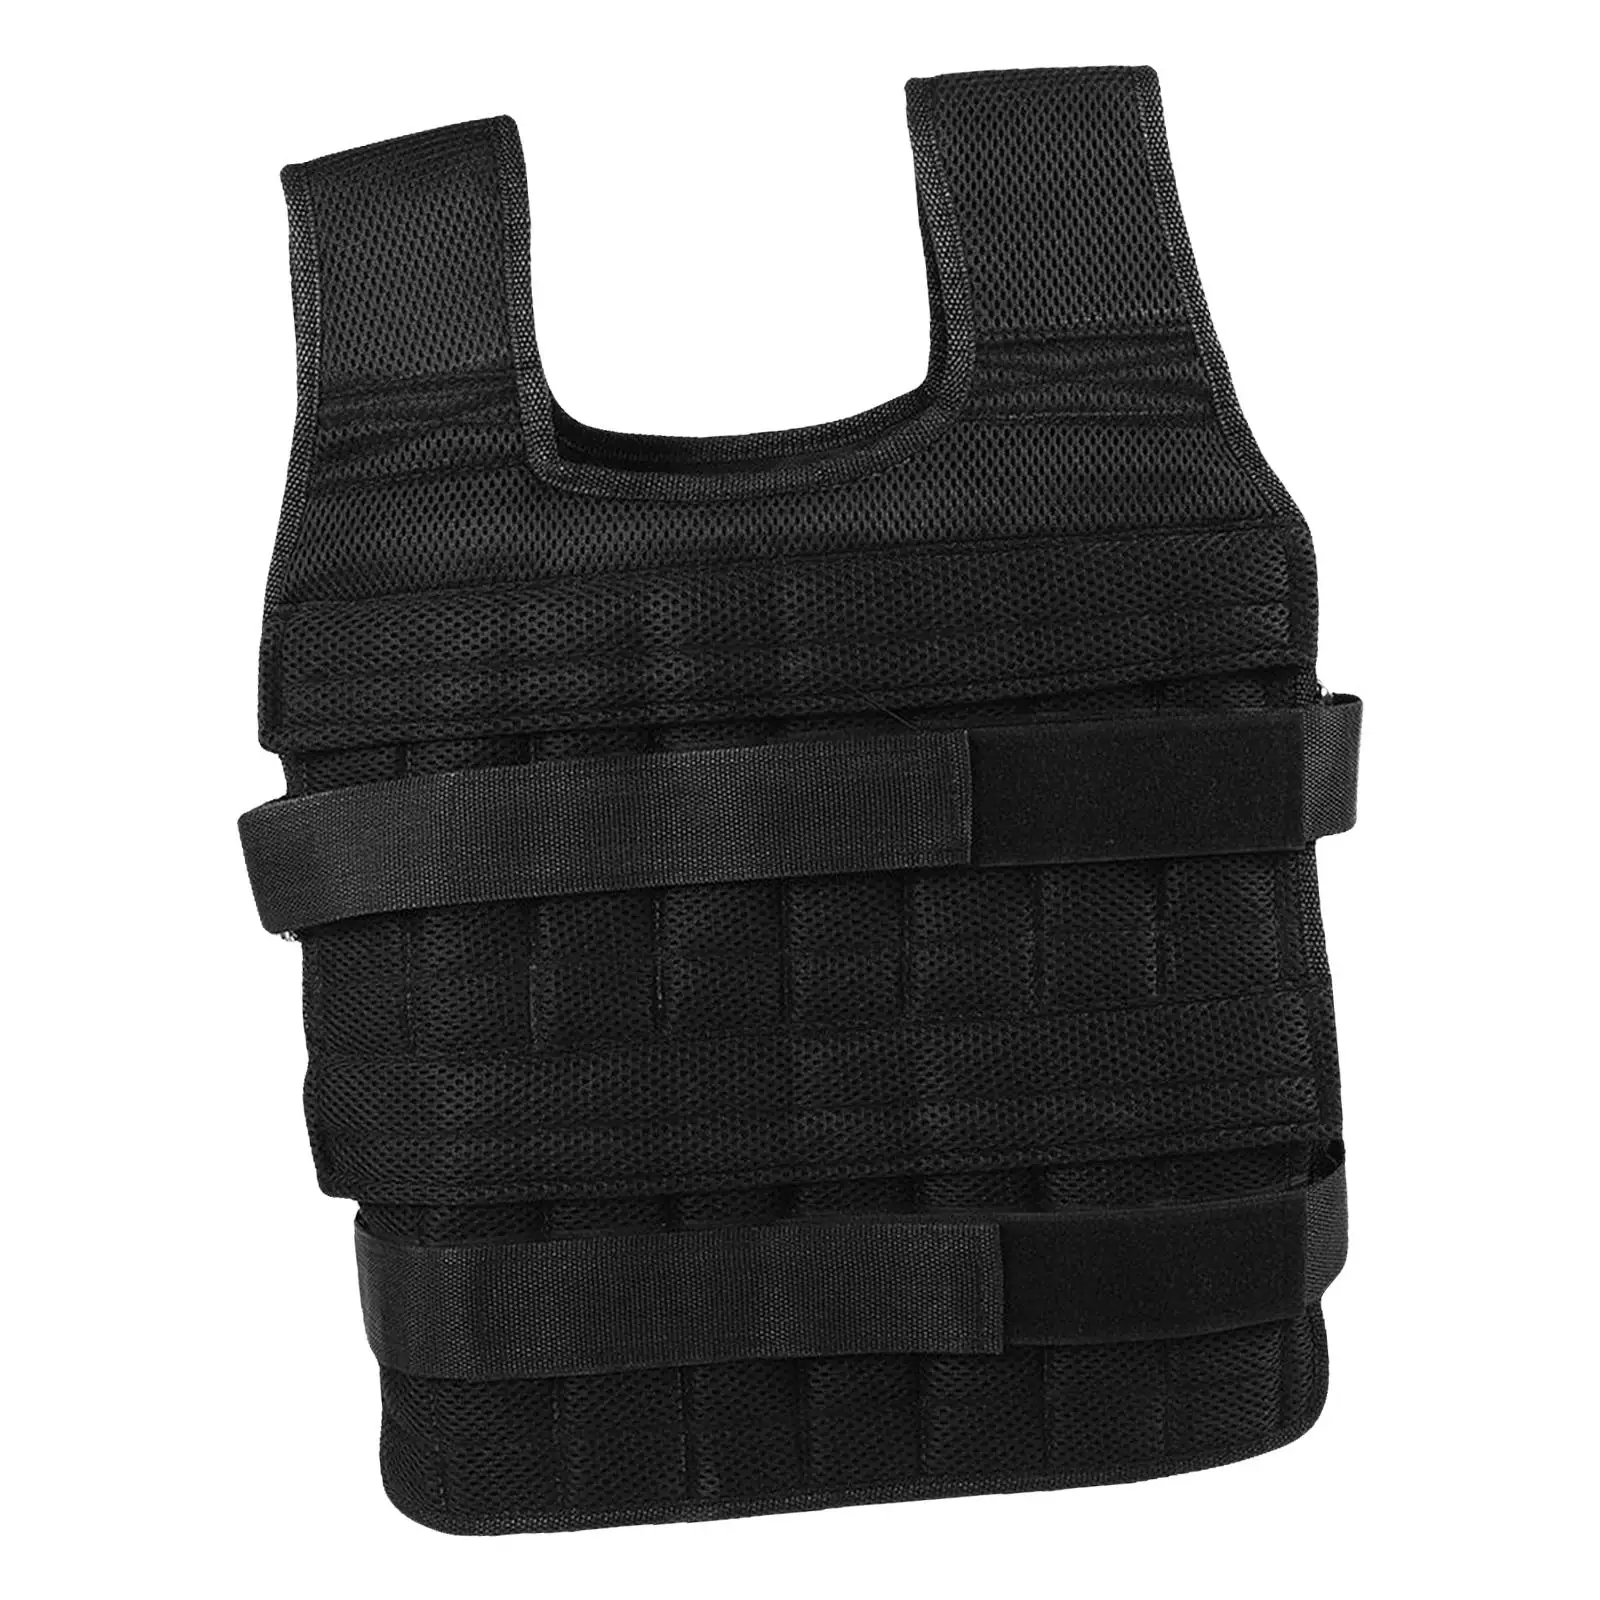 50KG Weight Vest For Boxing Weight Training  Gym Equipment Adjustable Waistcoat Jacket sand cloth